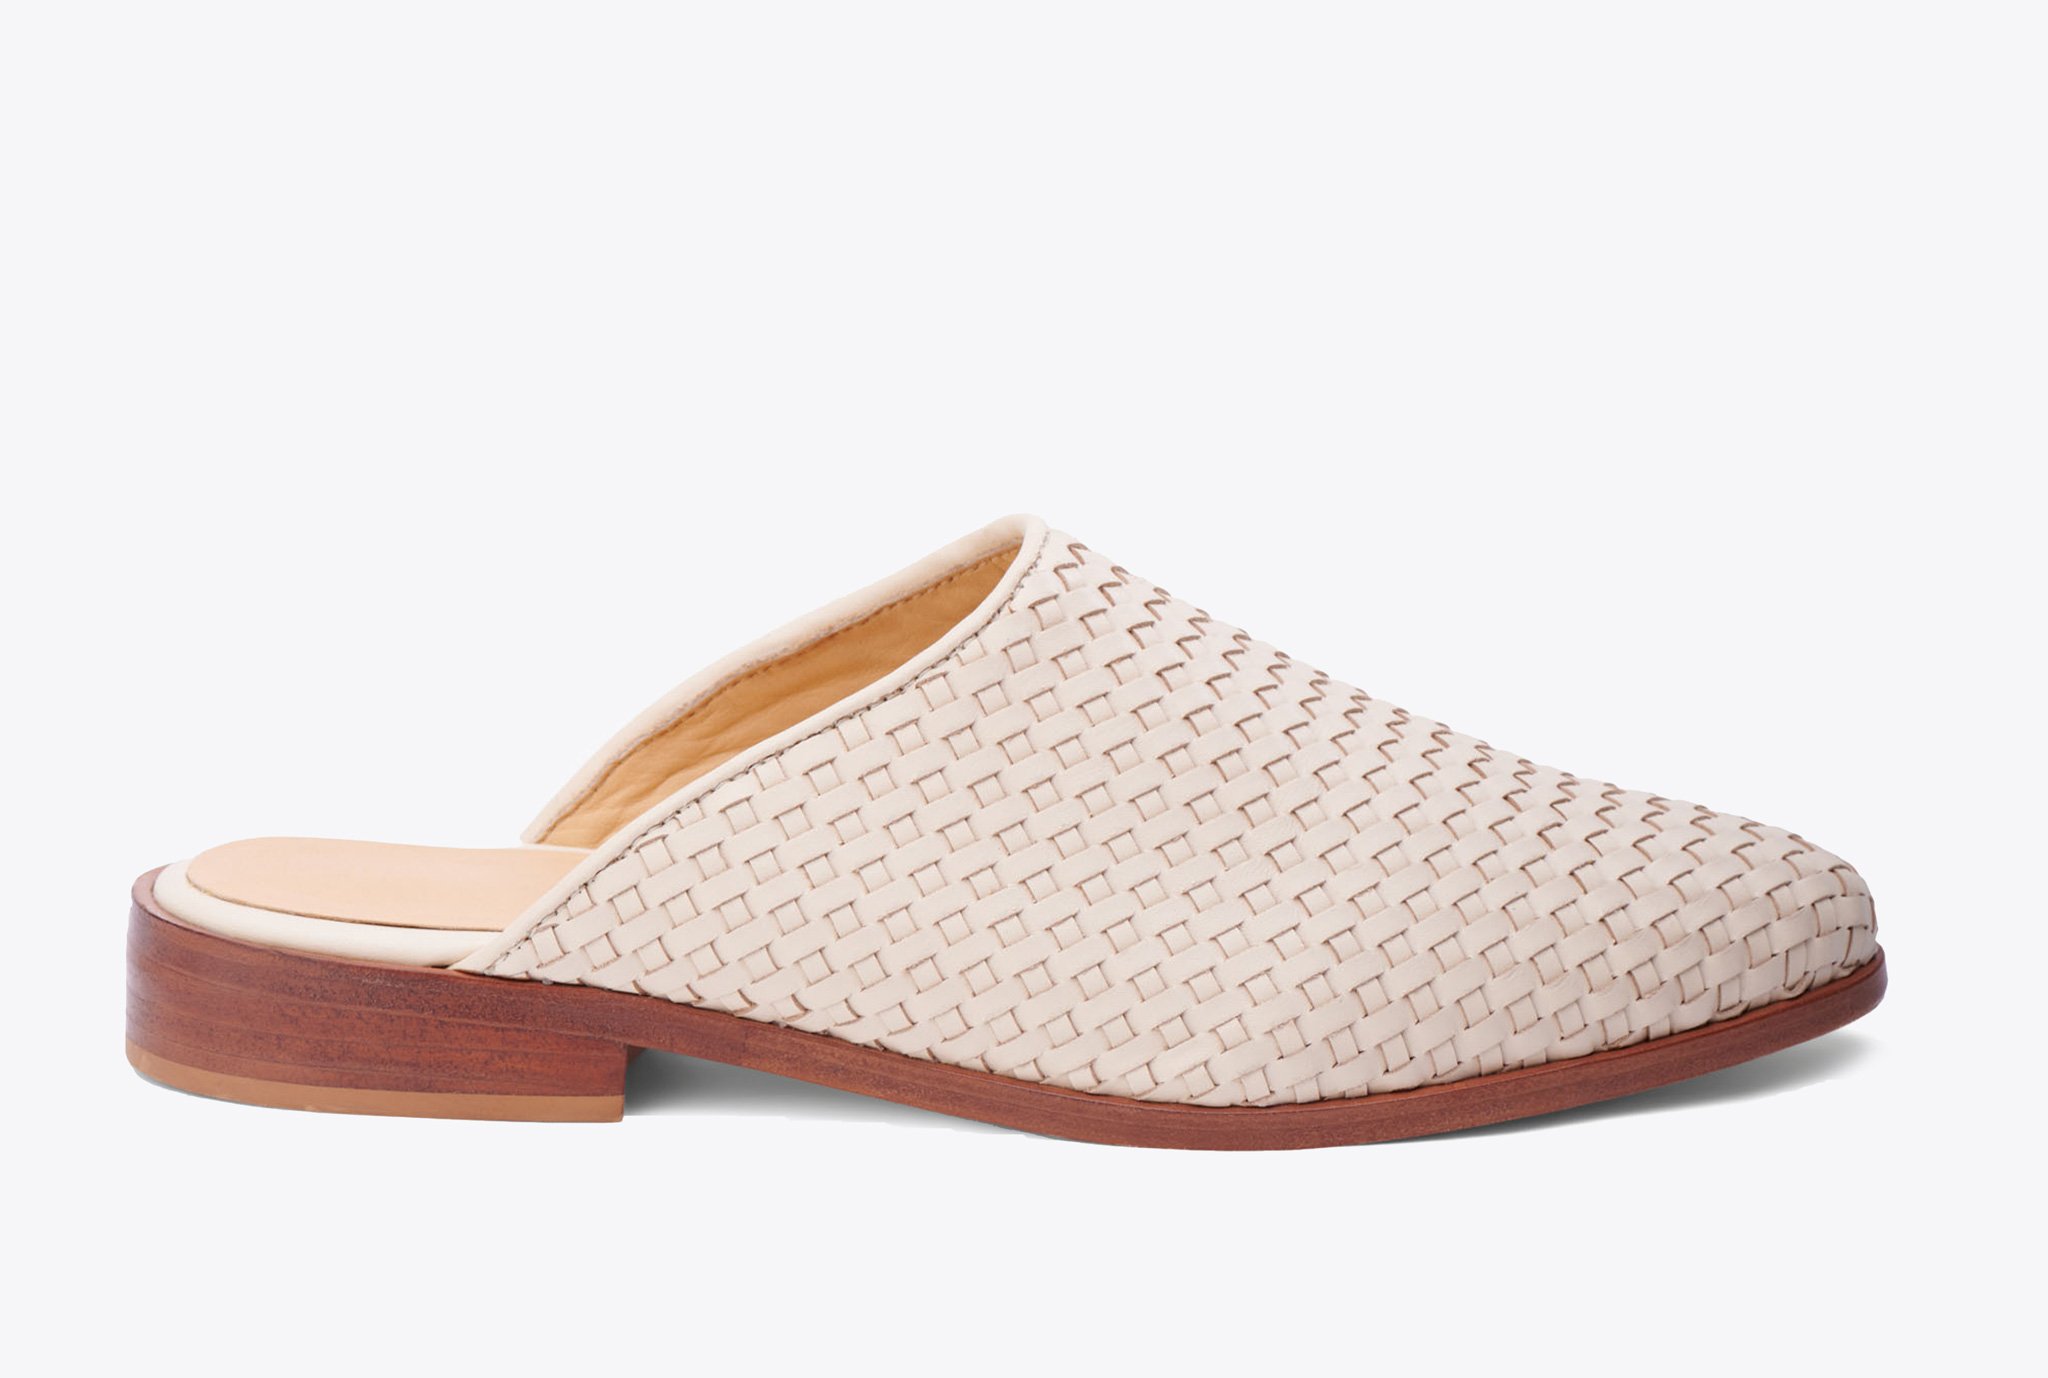 Nisolo Ama Woven Mule Woven Bone - Every Nisolo product is built on the foundation of comfort, function, and design. 